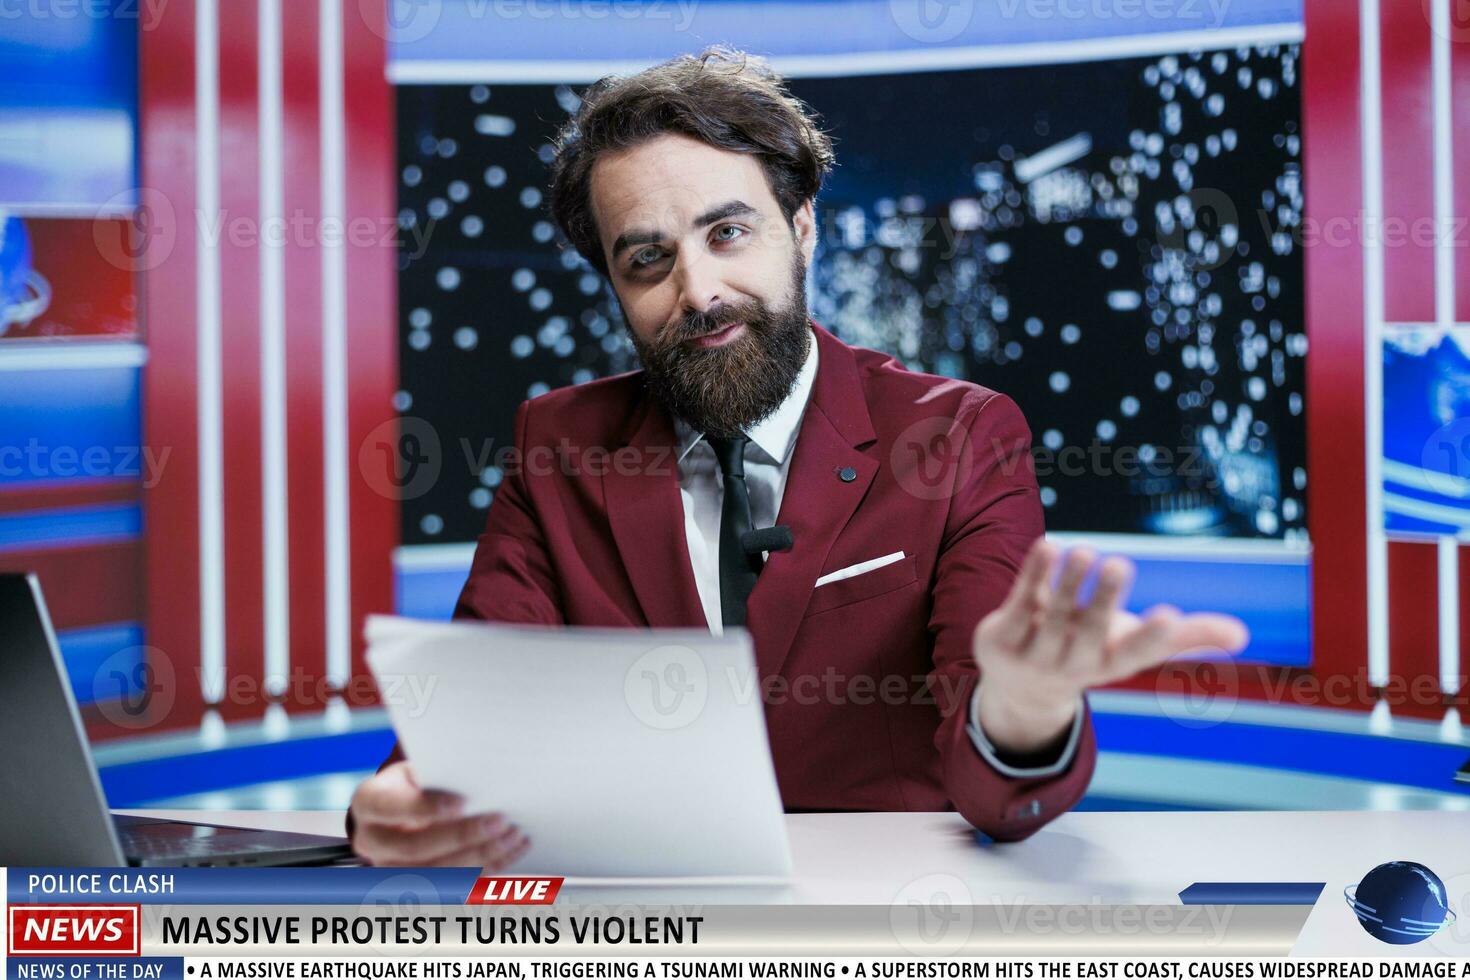 Newscaster covers protest news topic, talking about massive demonstration with crowd of people on strike. Journalist presenting report about violent community protesting, live talk show. photo